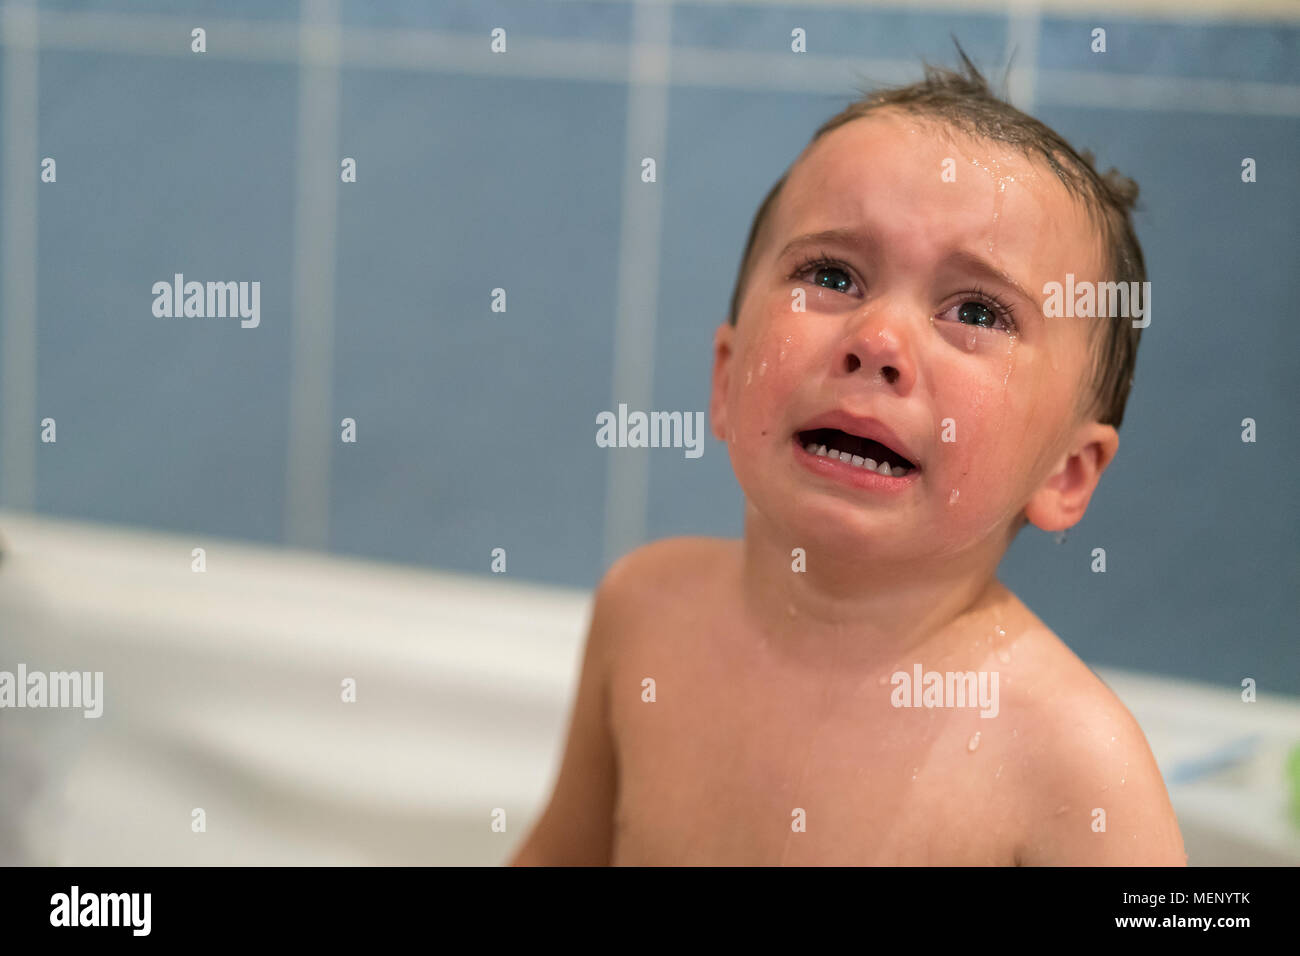 Crying Baby By In A Bathtub Infant Kid Sreaming While Taking A Bath Baby Cries In The Bathroom Stock Photo Alamy